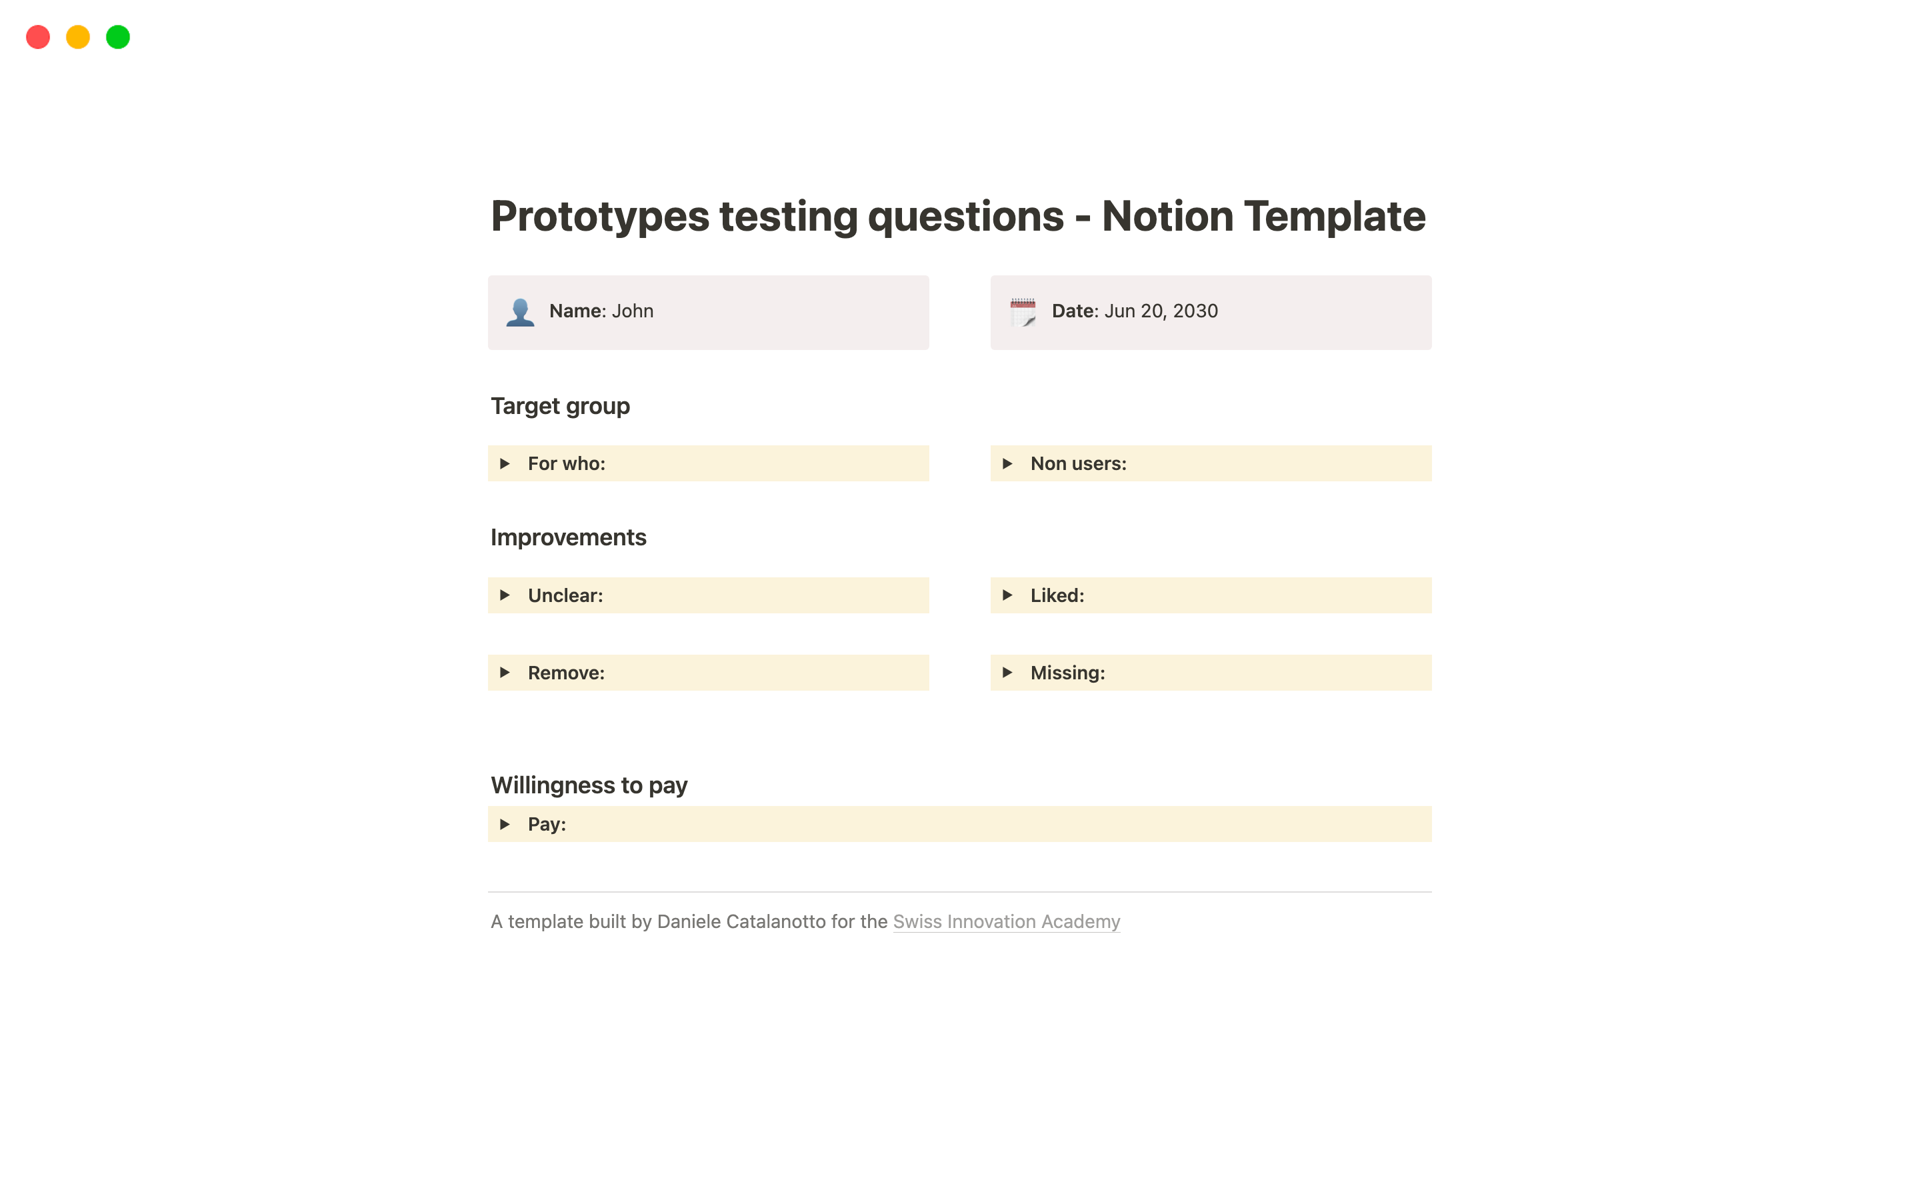 A set of questions you can use to test almost any prototype

